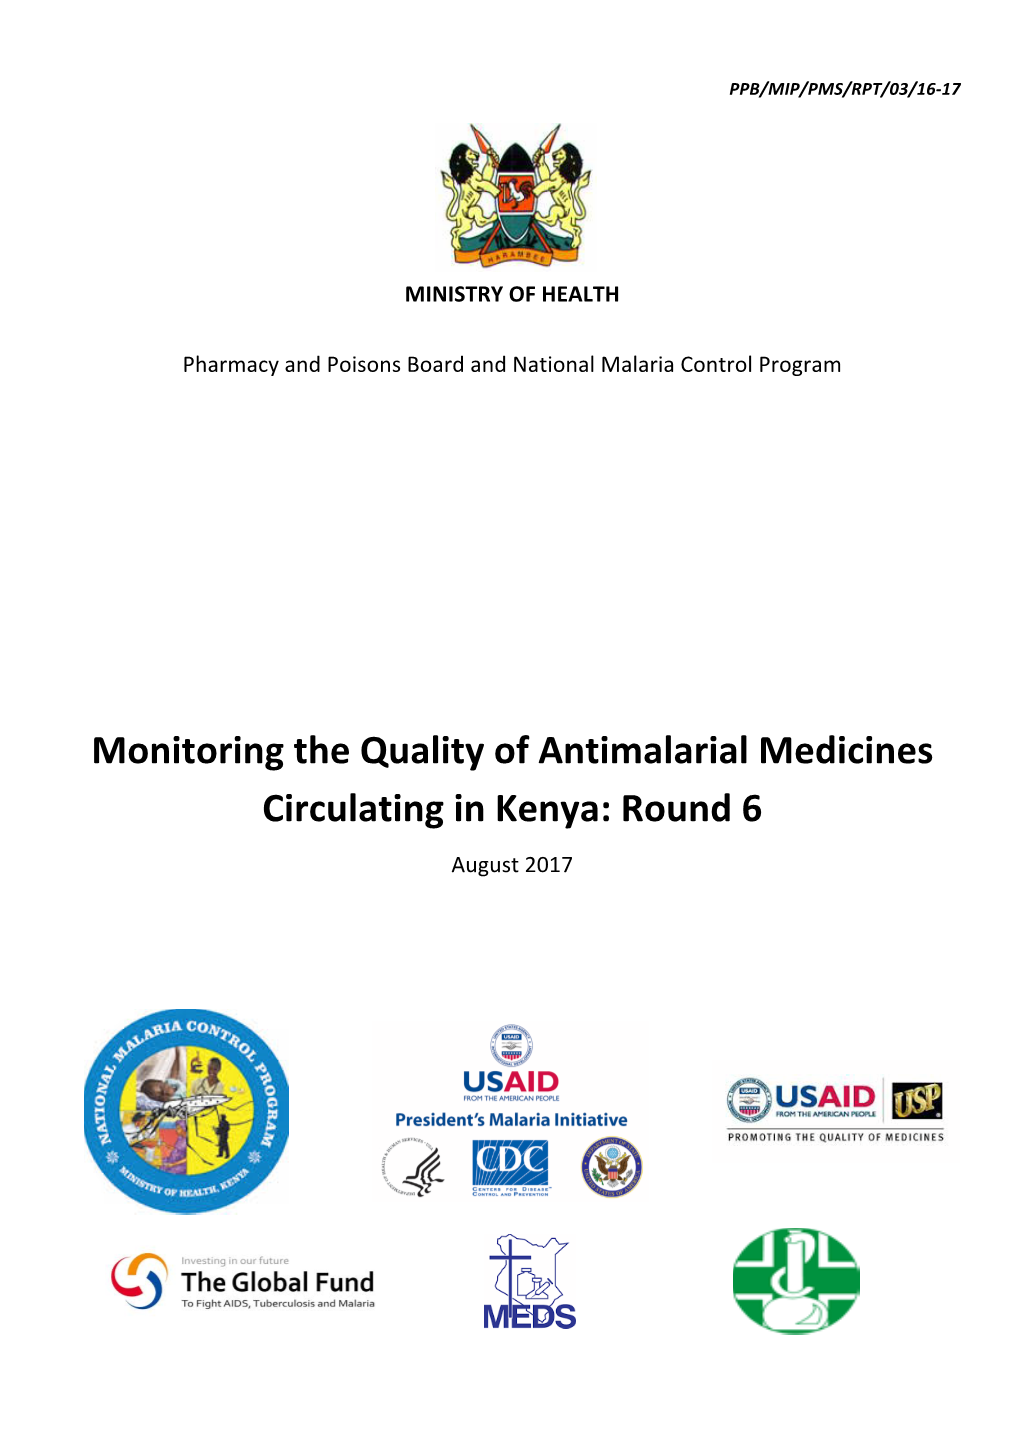 Monitoring the Quality of Antimalarial Medicines Circulating in Kenya: Round 6 August 2017